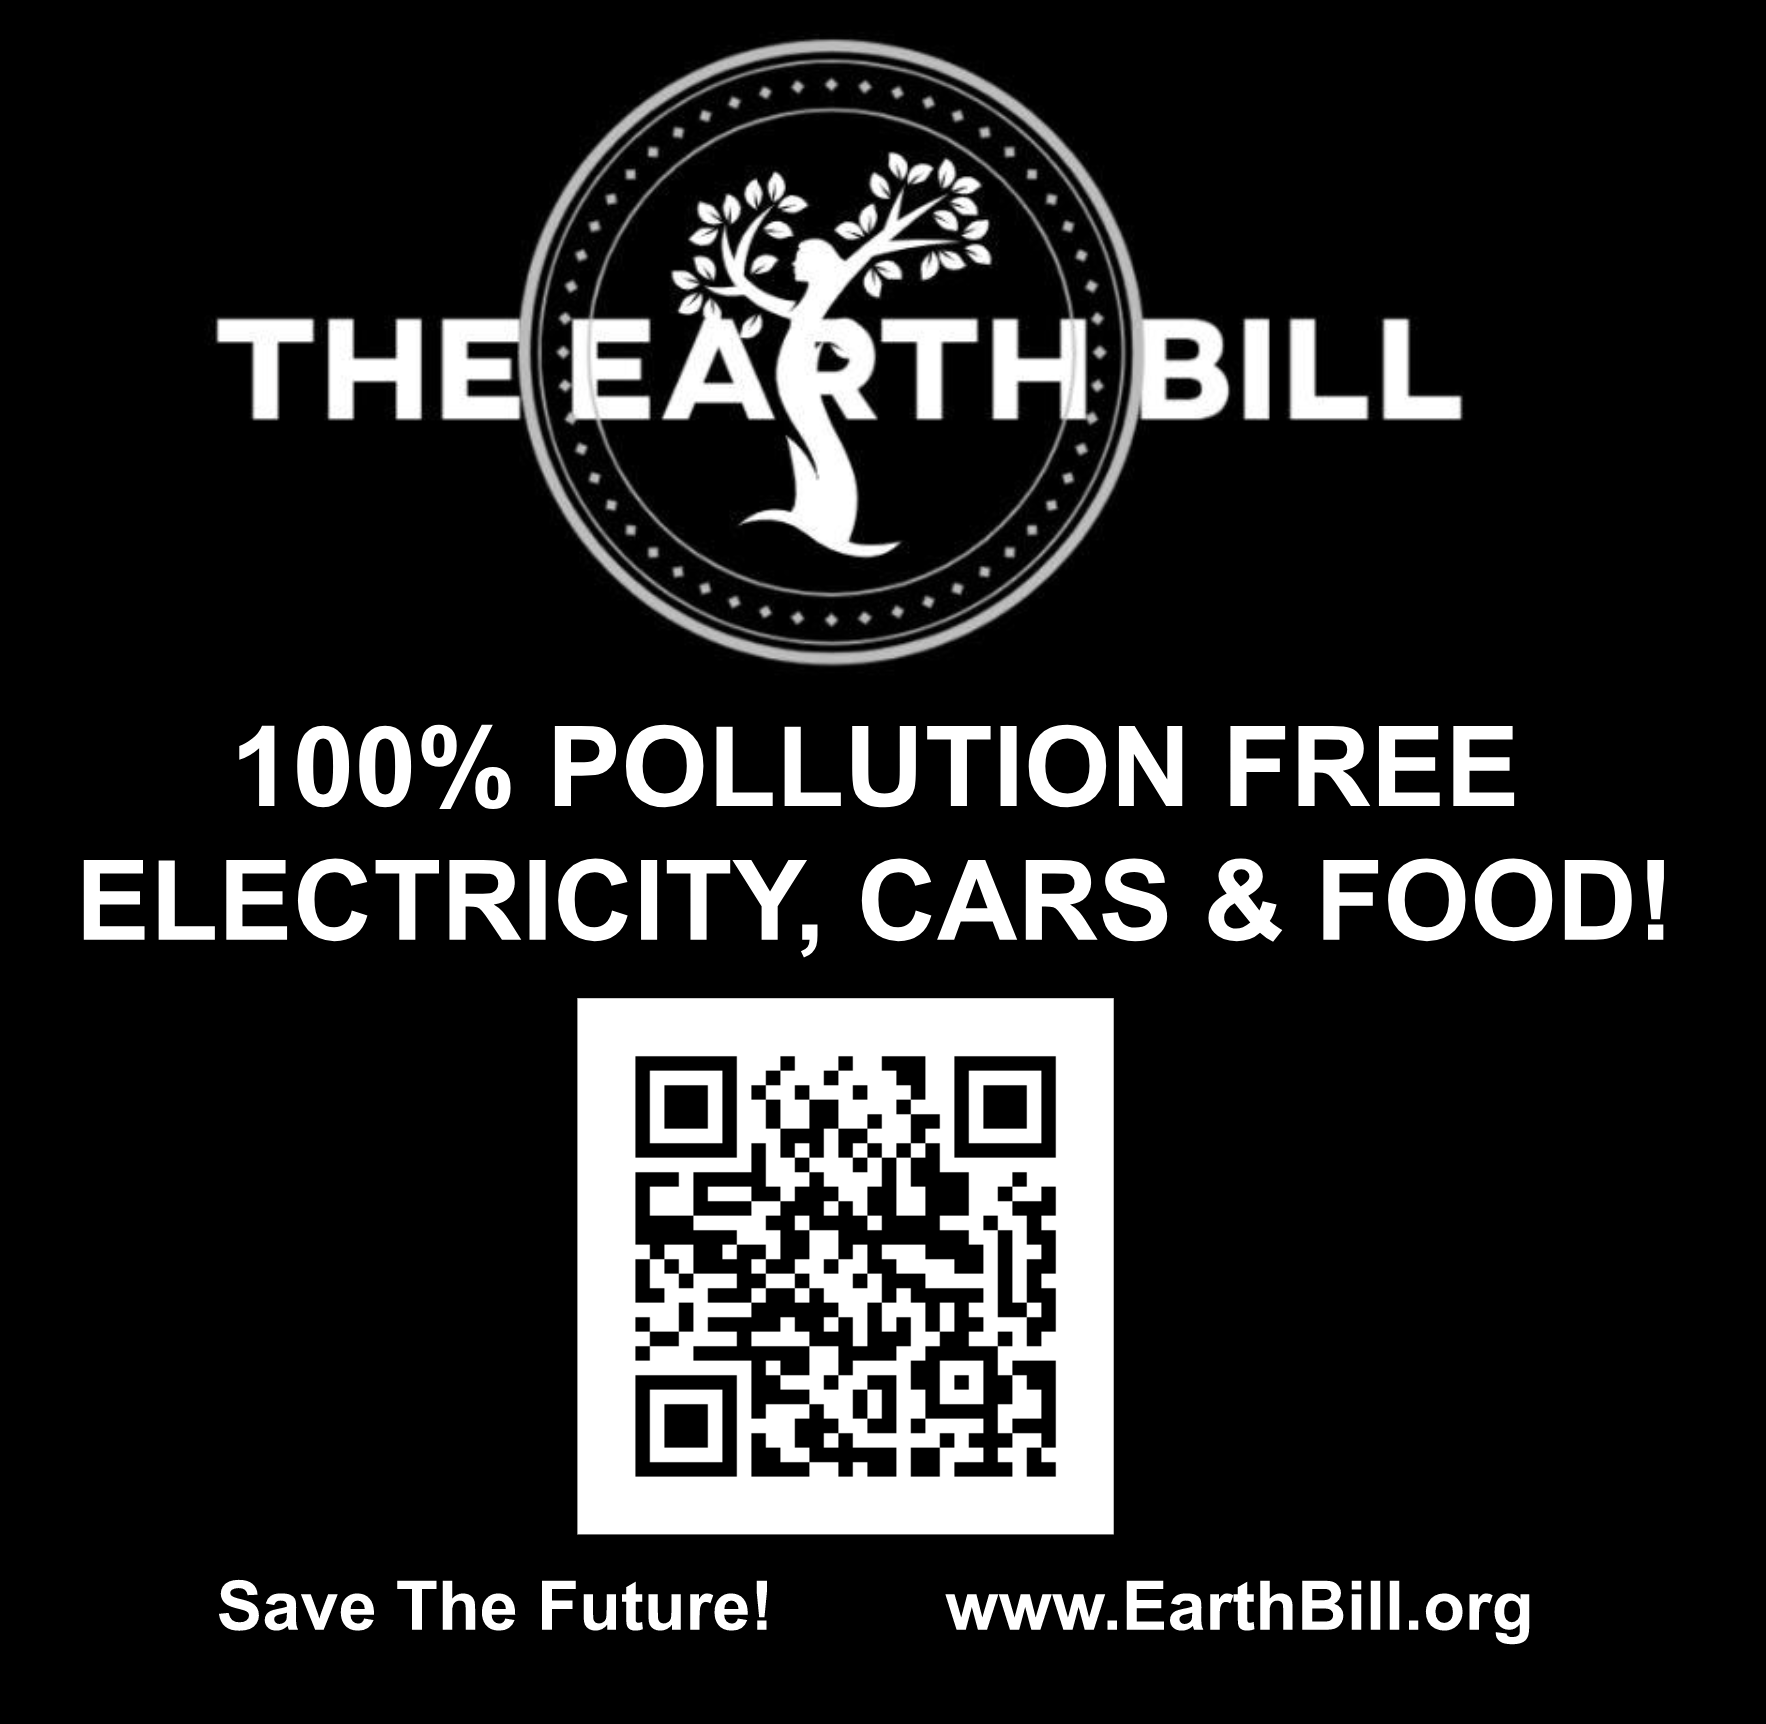 The Earth Bill. 100% polutaion free. Electricity, cars, and food! Save the future! www.earthbil.org